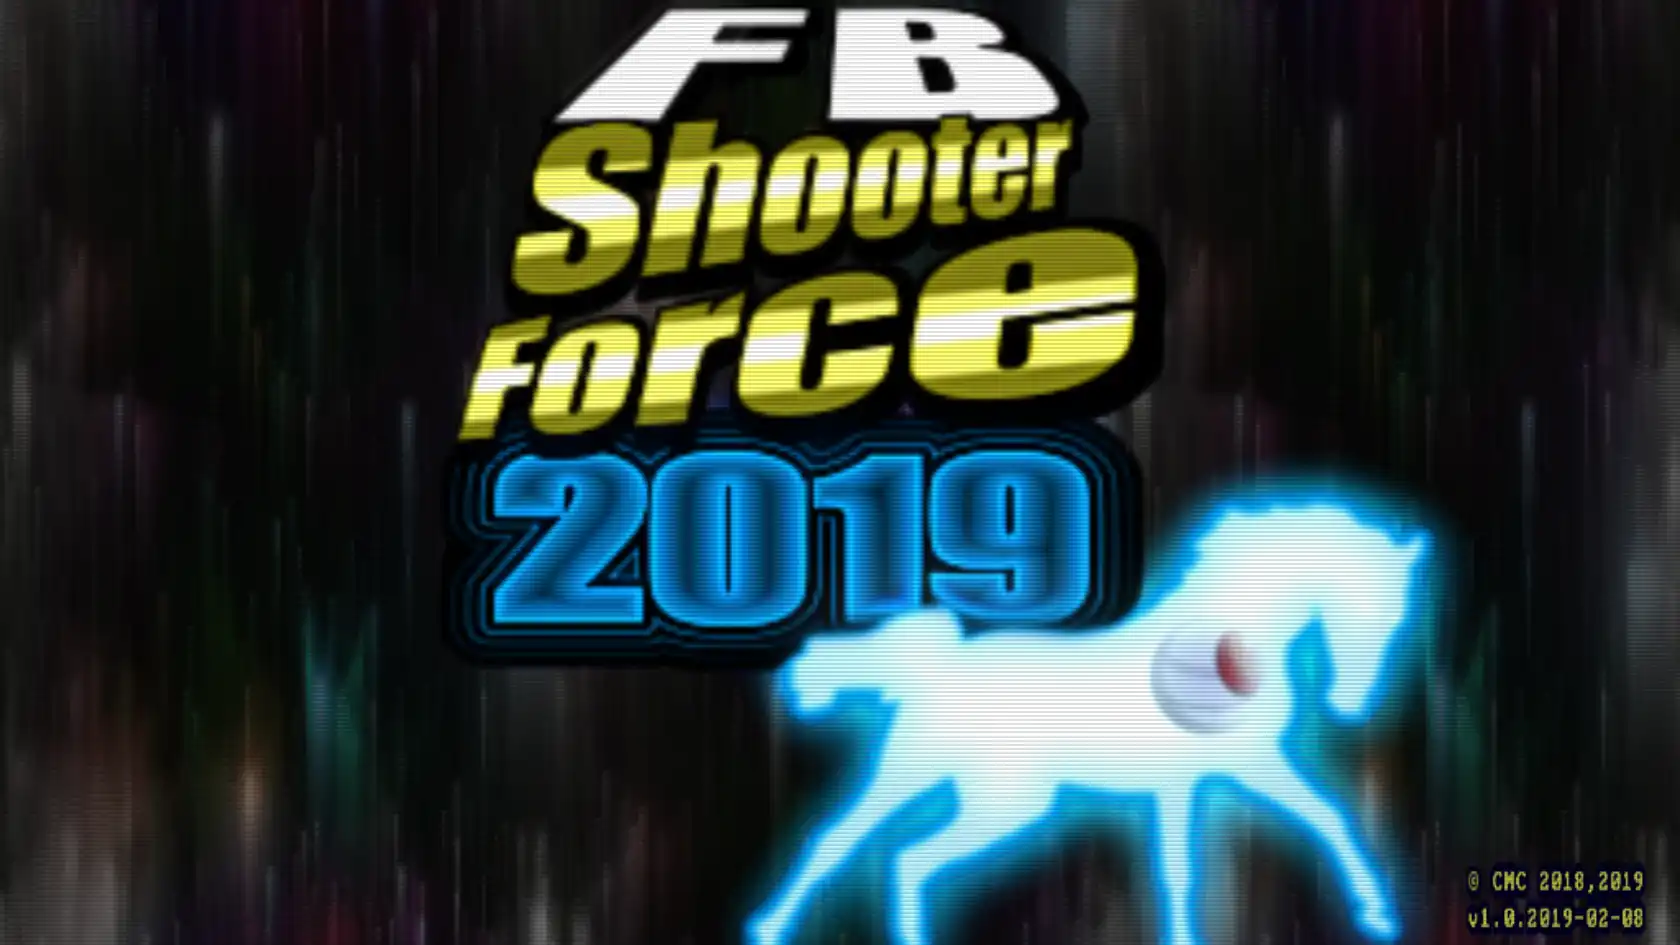 Download web tool or web app FB Shooter Force 2019